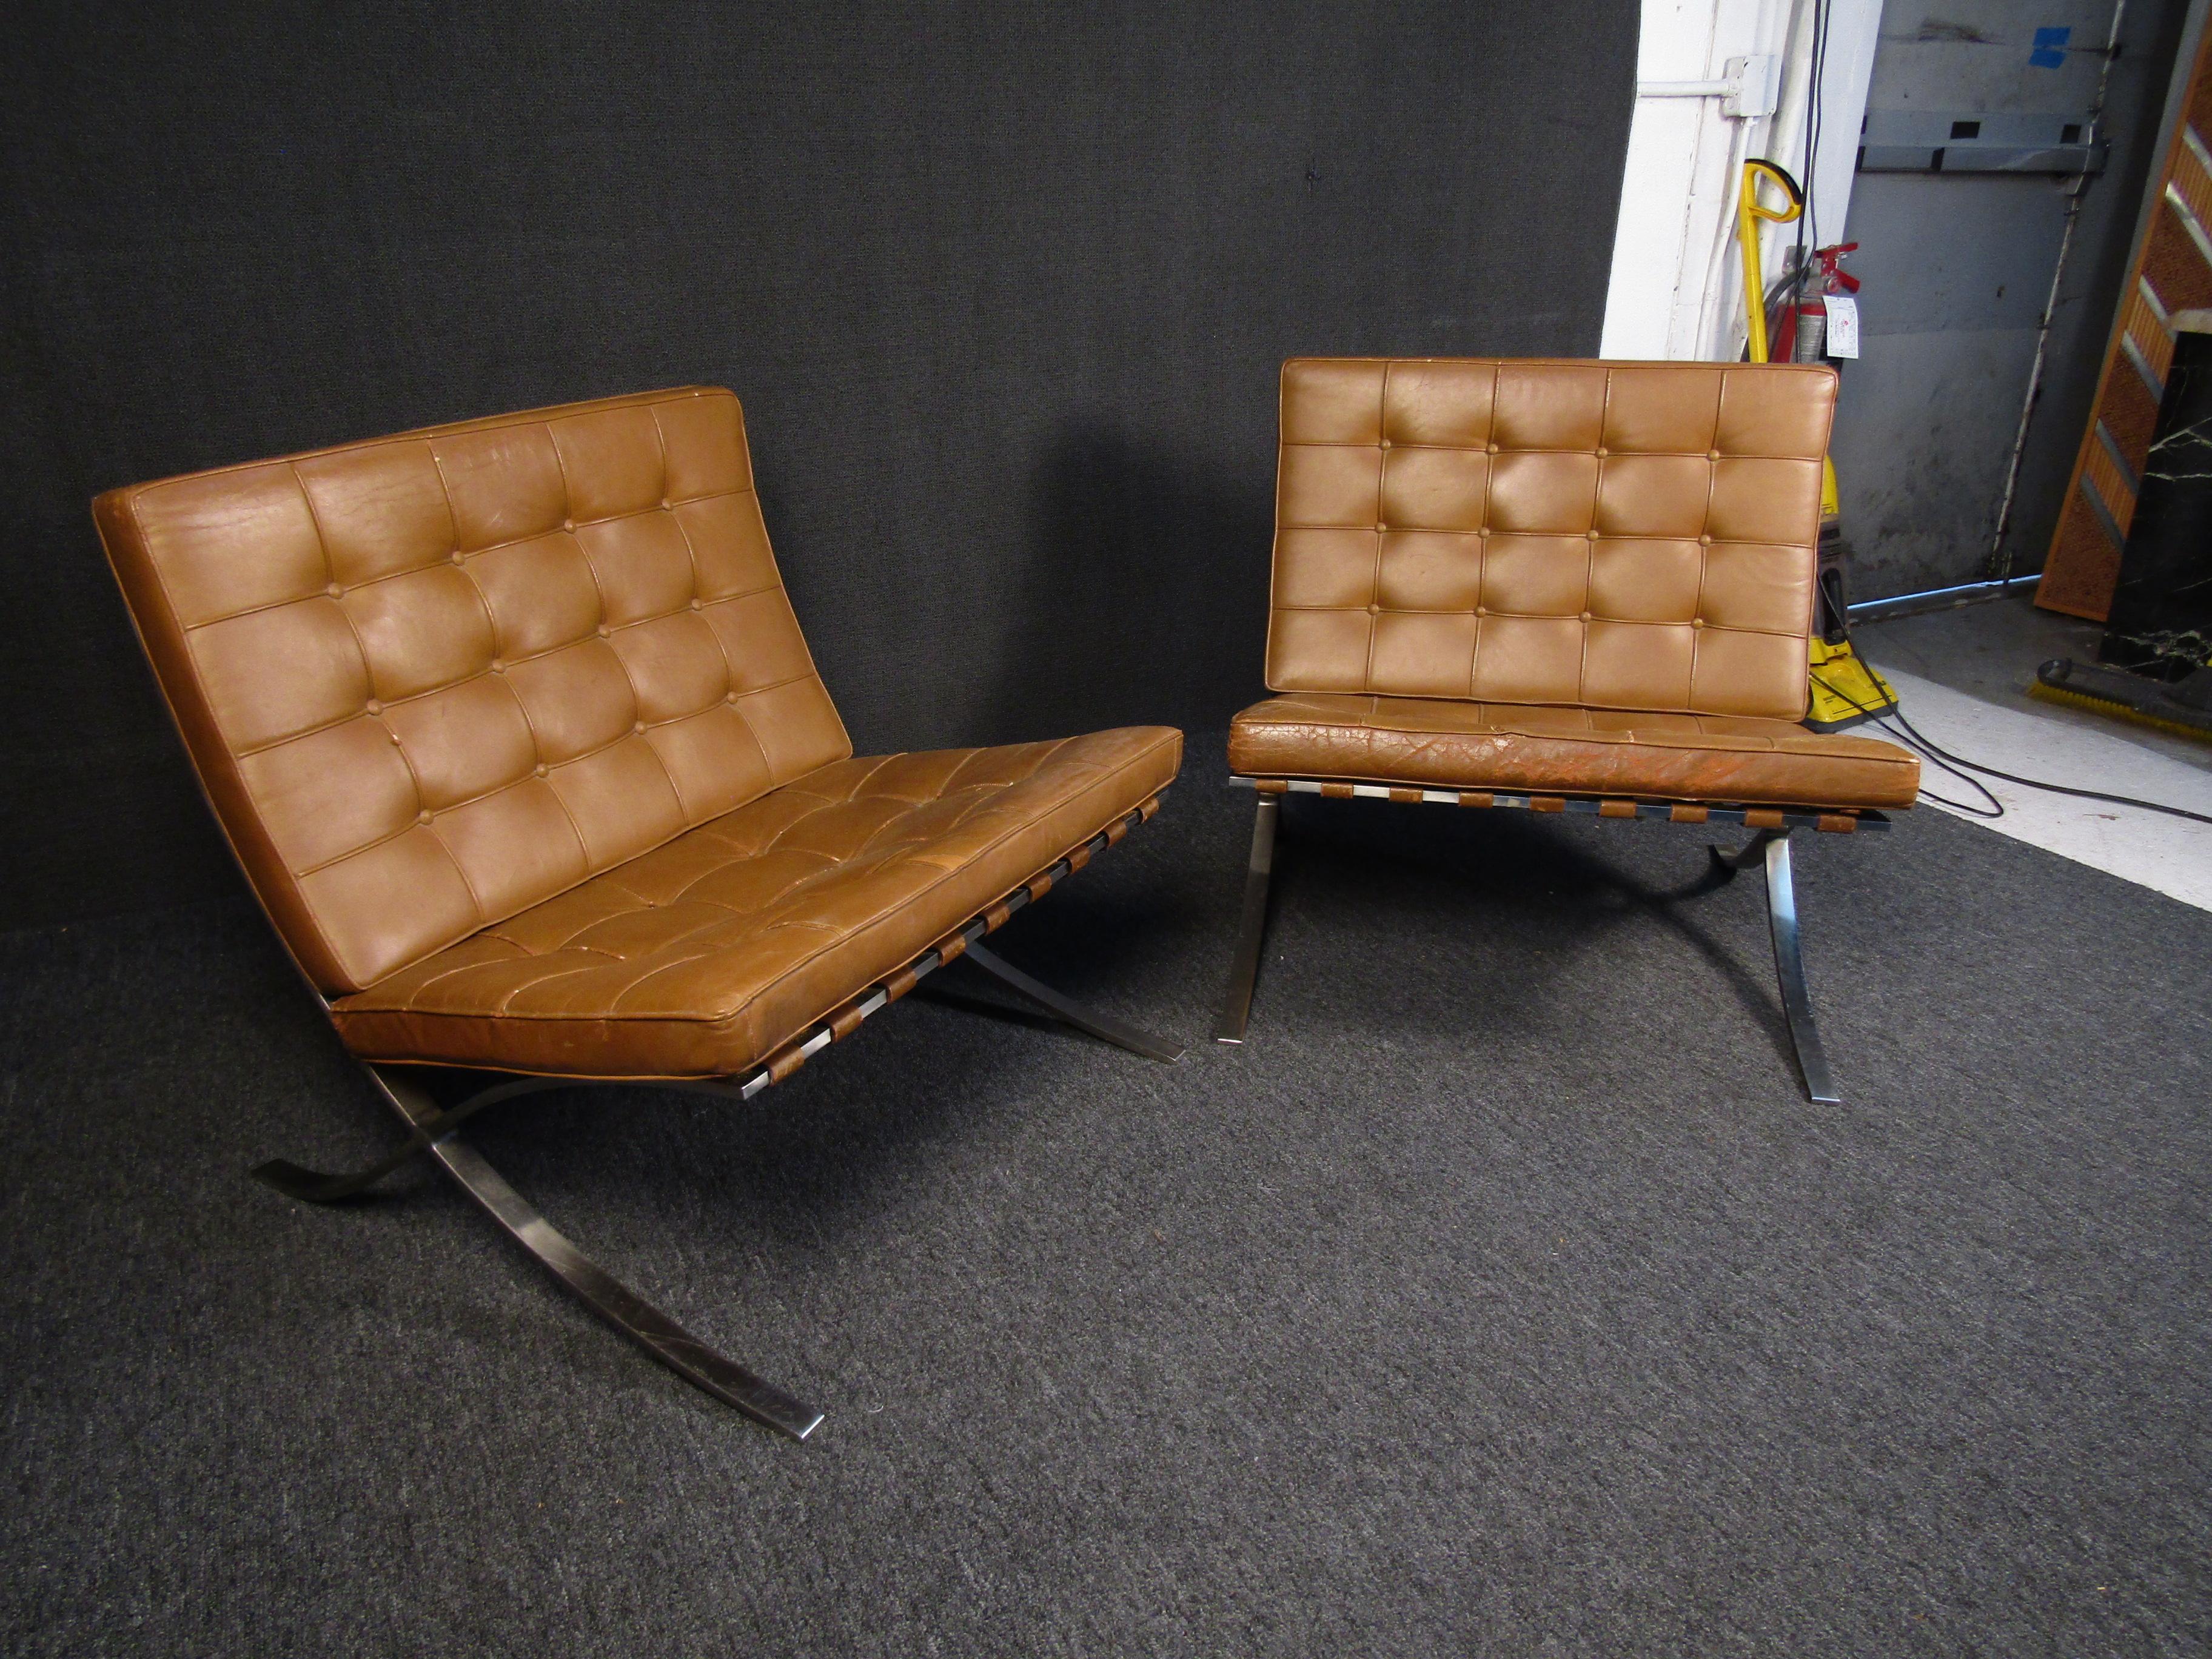 This set of original tan lounge chairs are well made and in fair condition. With vinyl seating and chrome plated steel frame construction, these have been well cared for and would make an excellent addition to your collection.